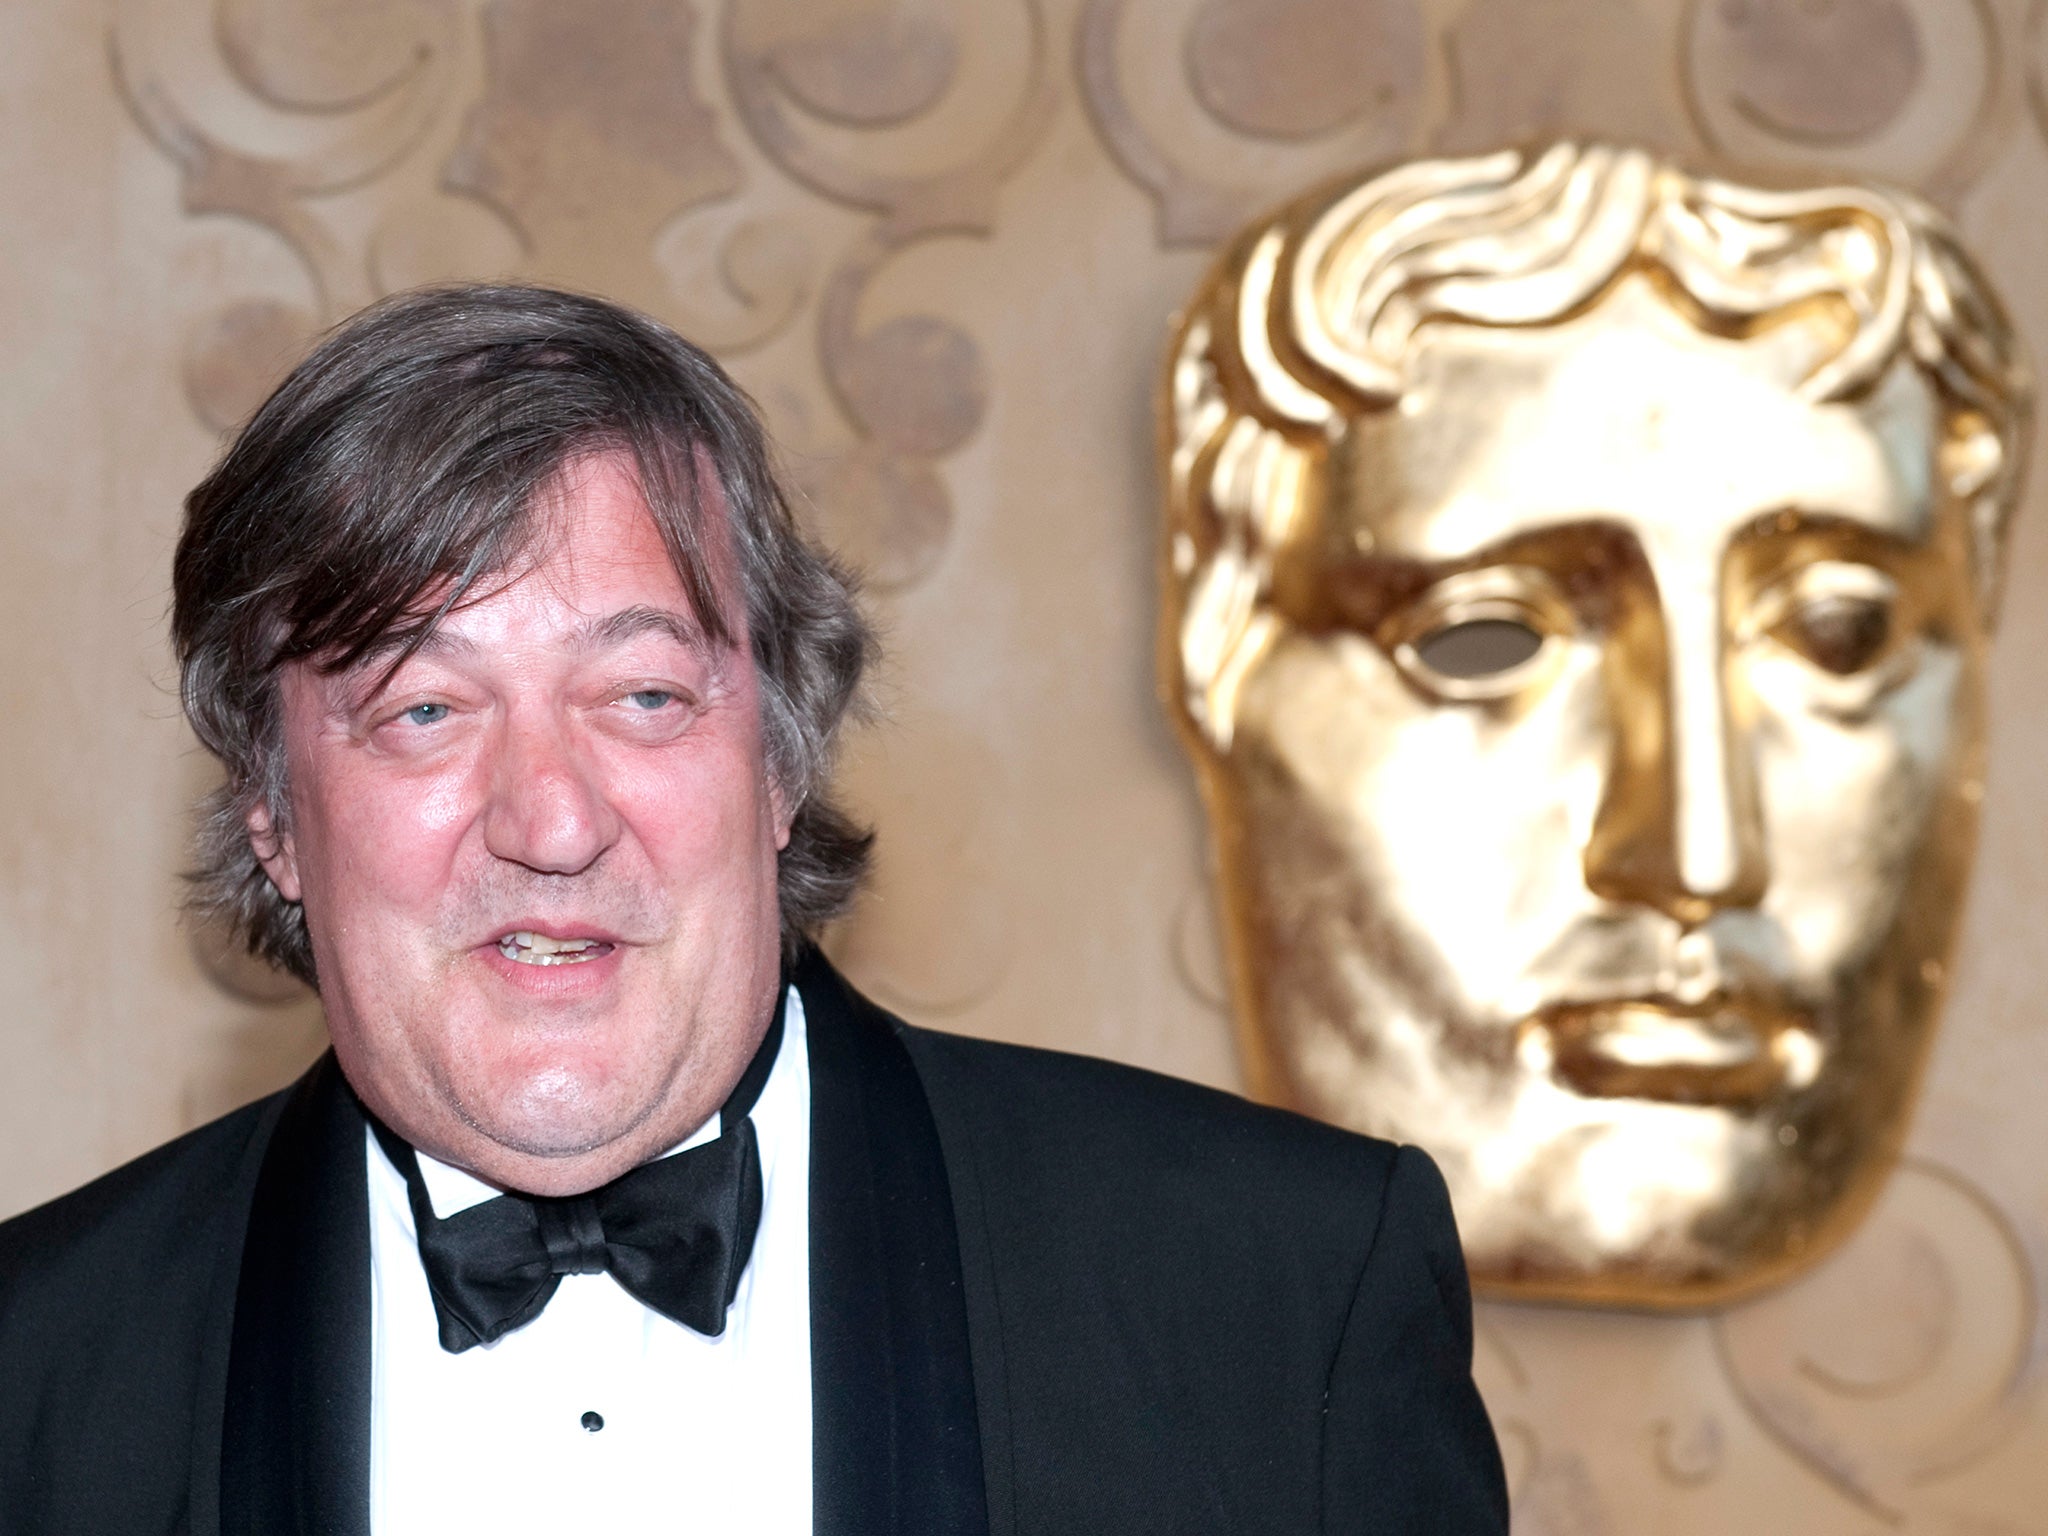 Stephen Fry says that the system simplifies music streaming to a more accessible level